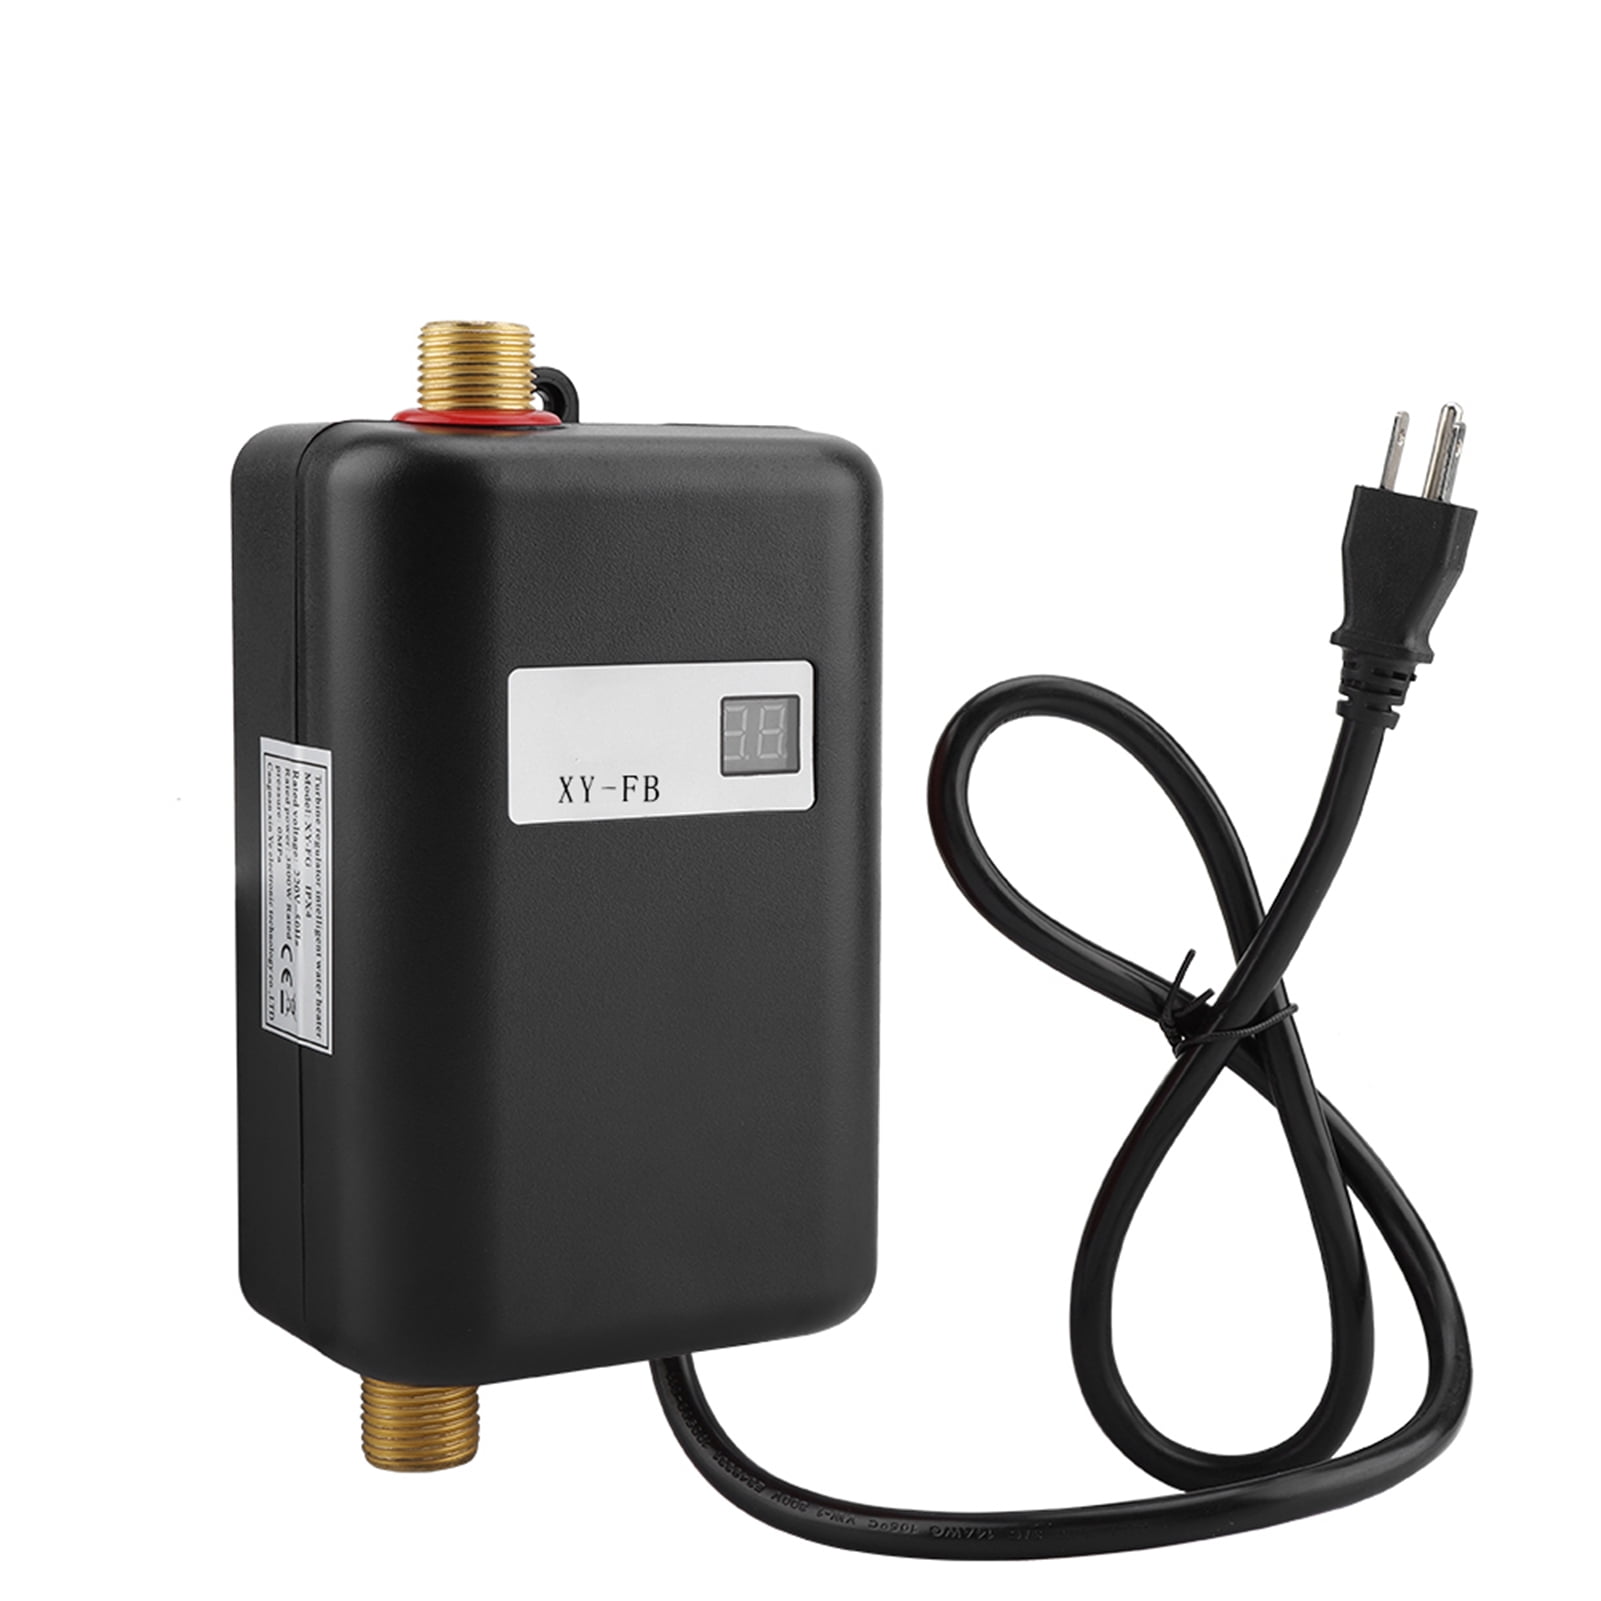 110V 3000W Mini Electric Hot Water Heater Bathroom Kitchen Tankless Instant Water Heater Black 